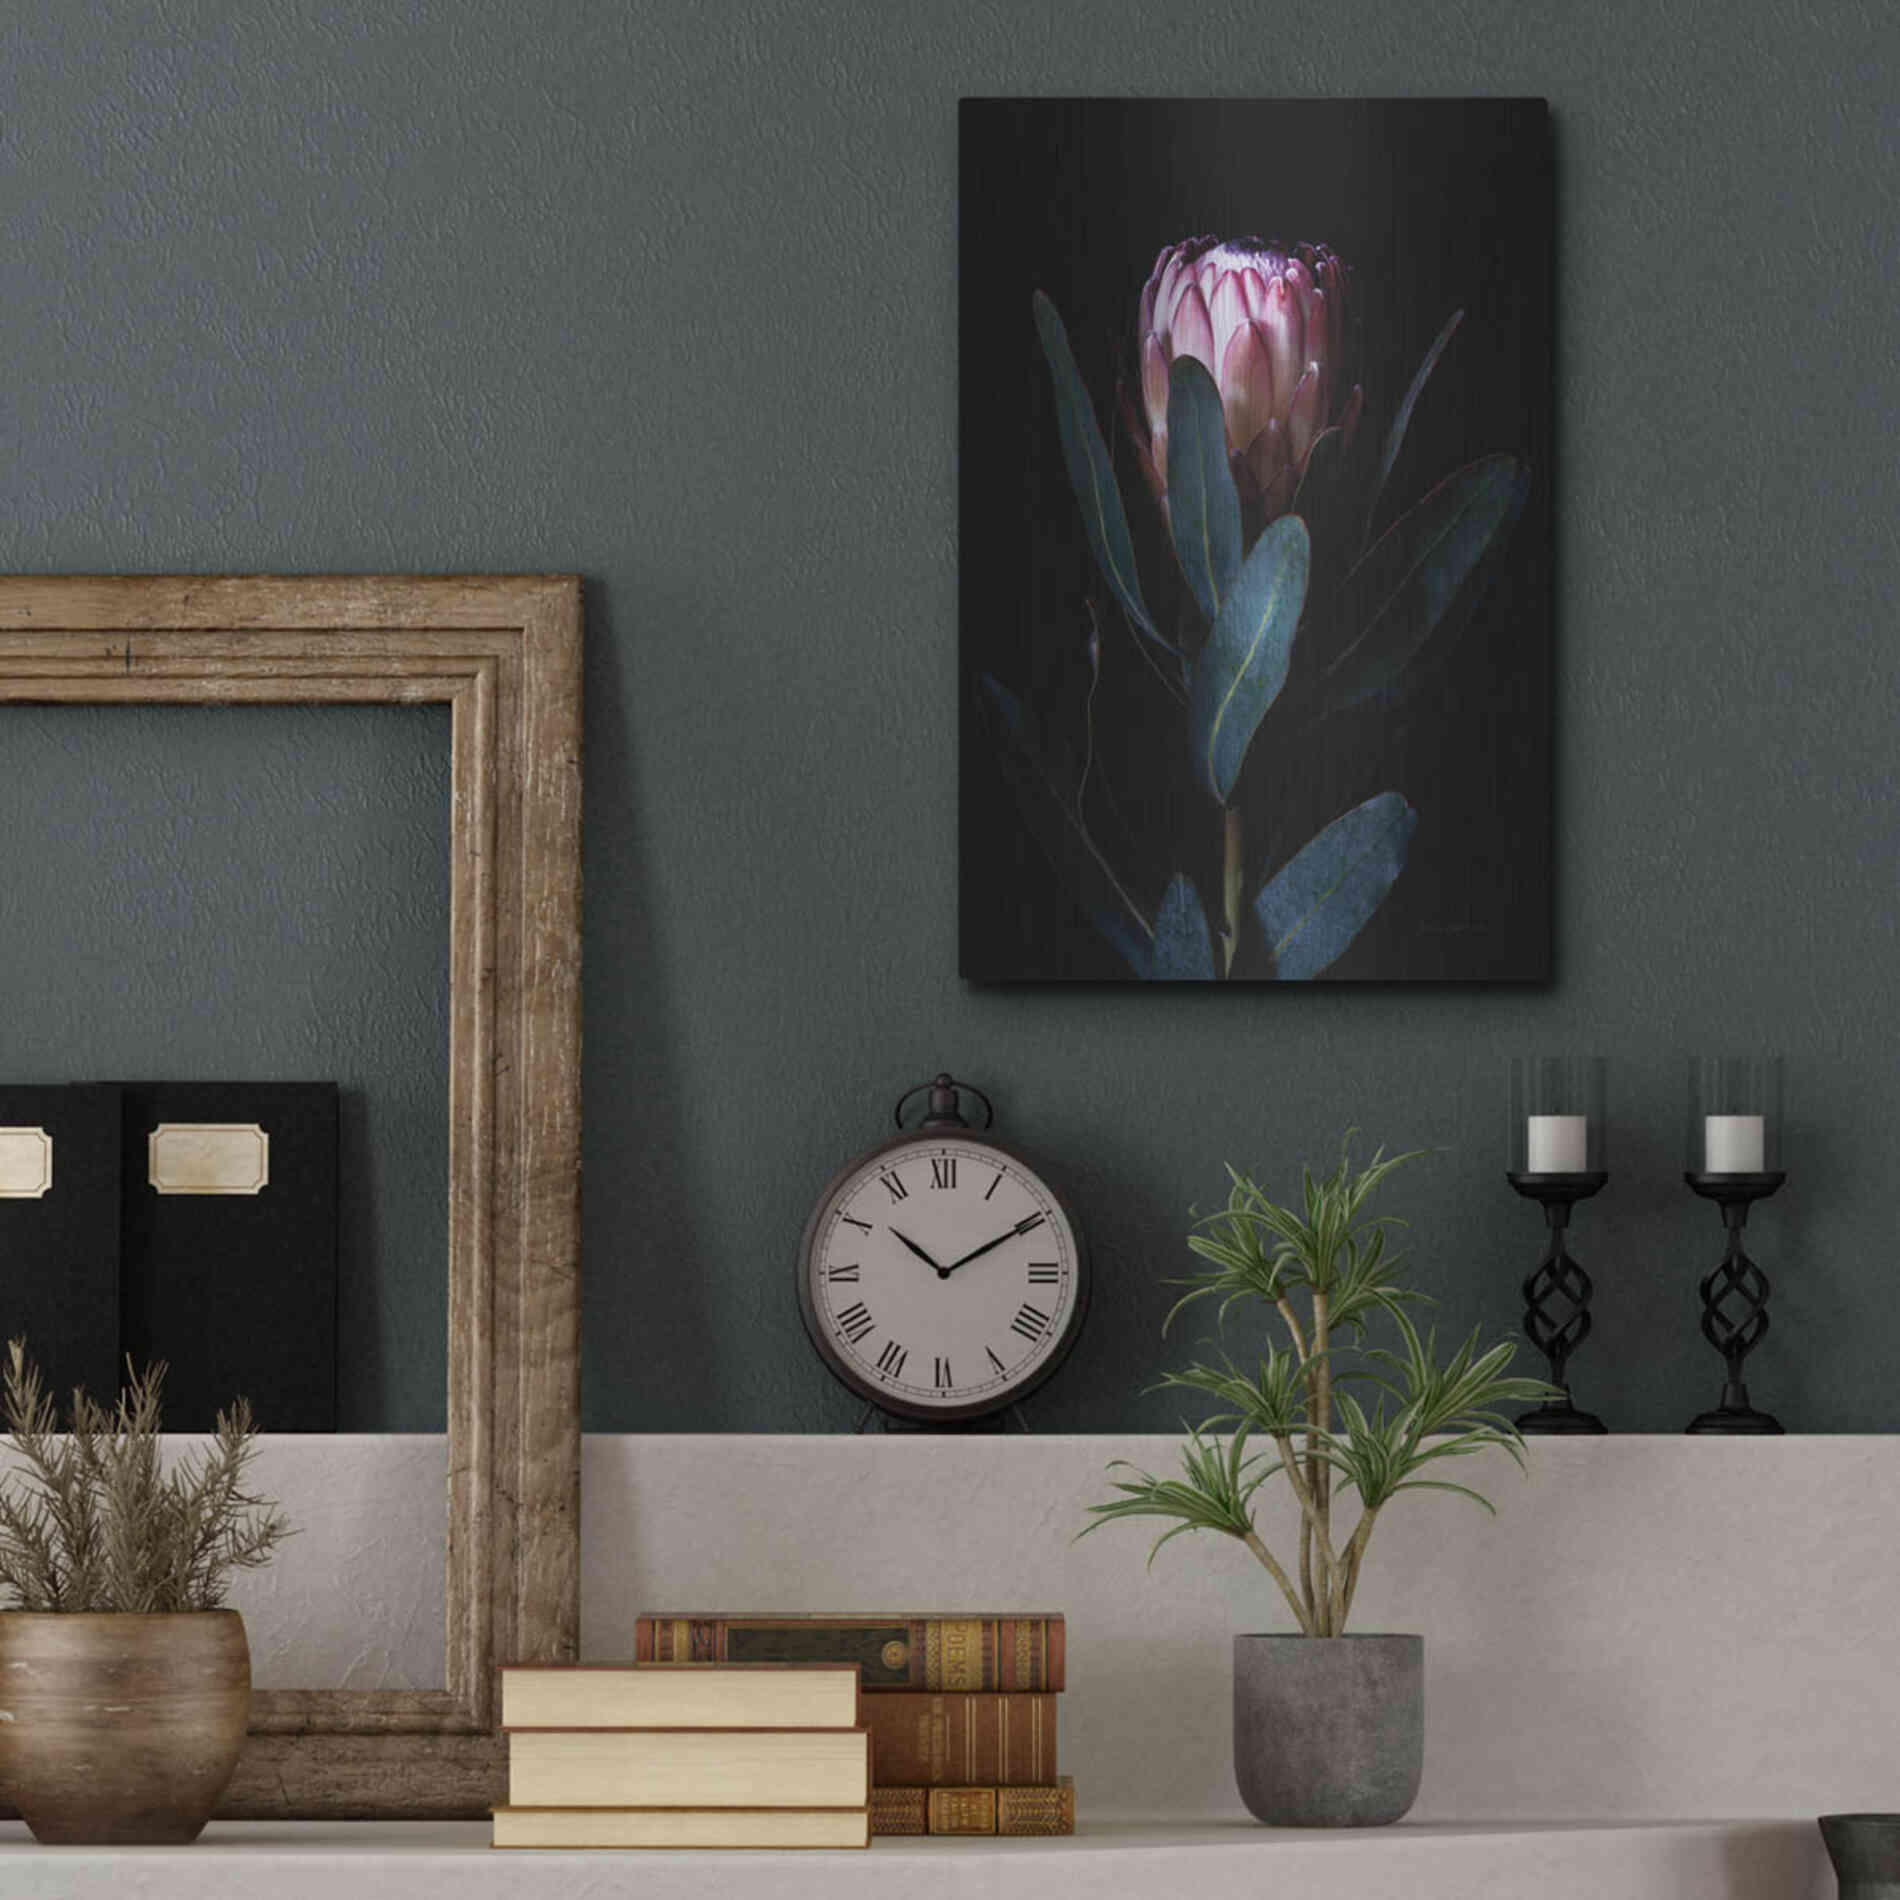 Luxe Metal Art 'Protea Portrait' by Elise Catterall, Metal Wall Art,12x16